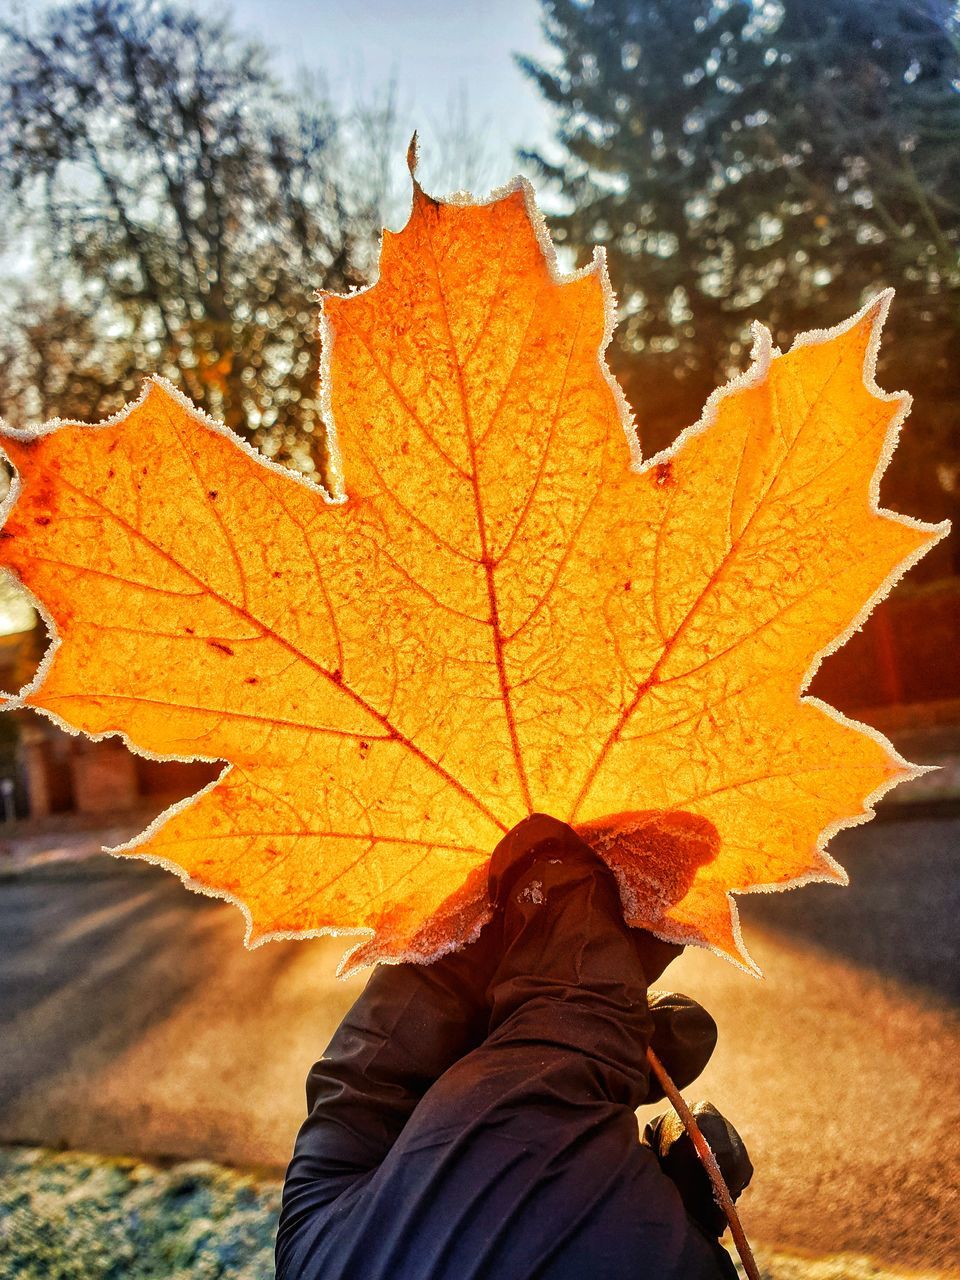 PERSON ON AUTUMN LEAVES